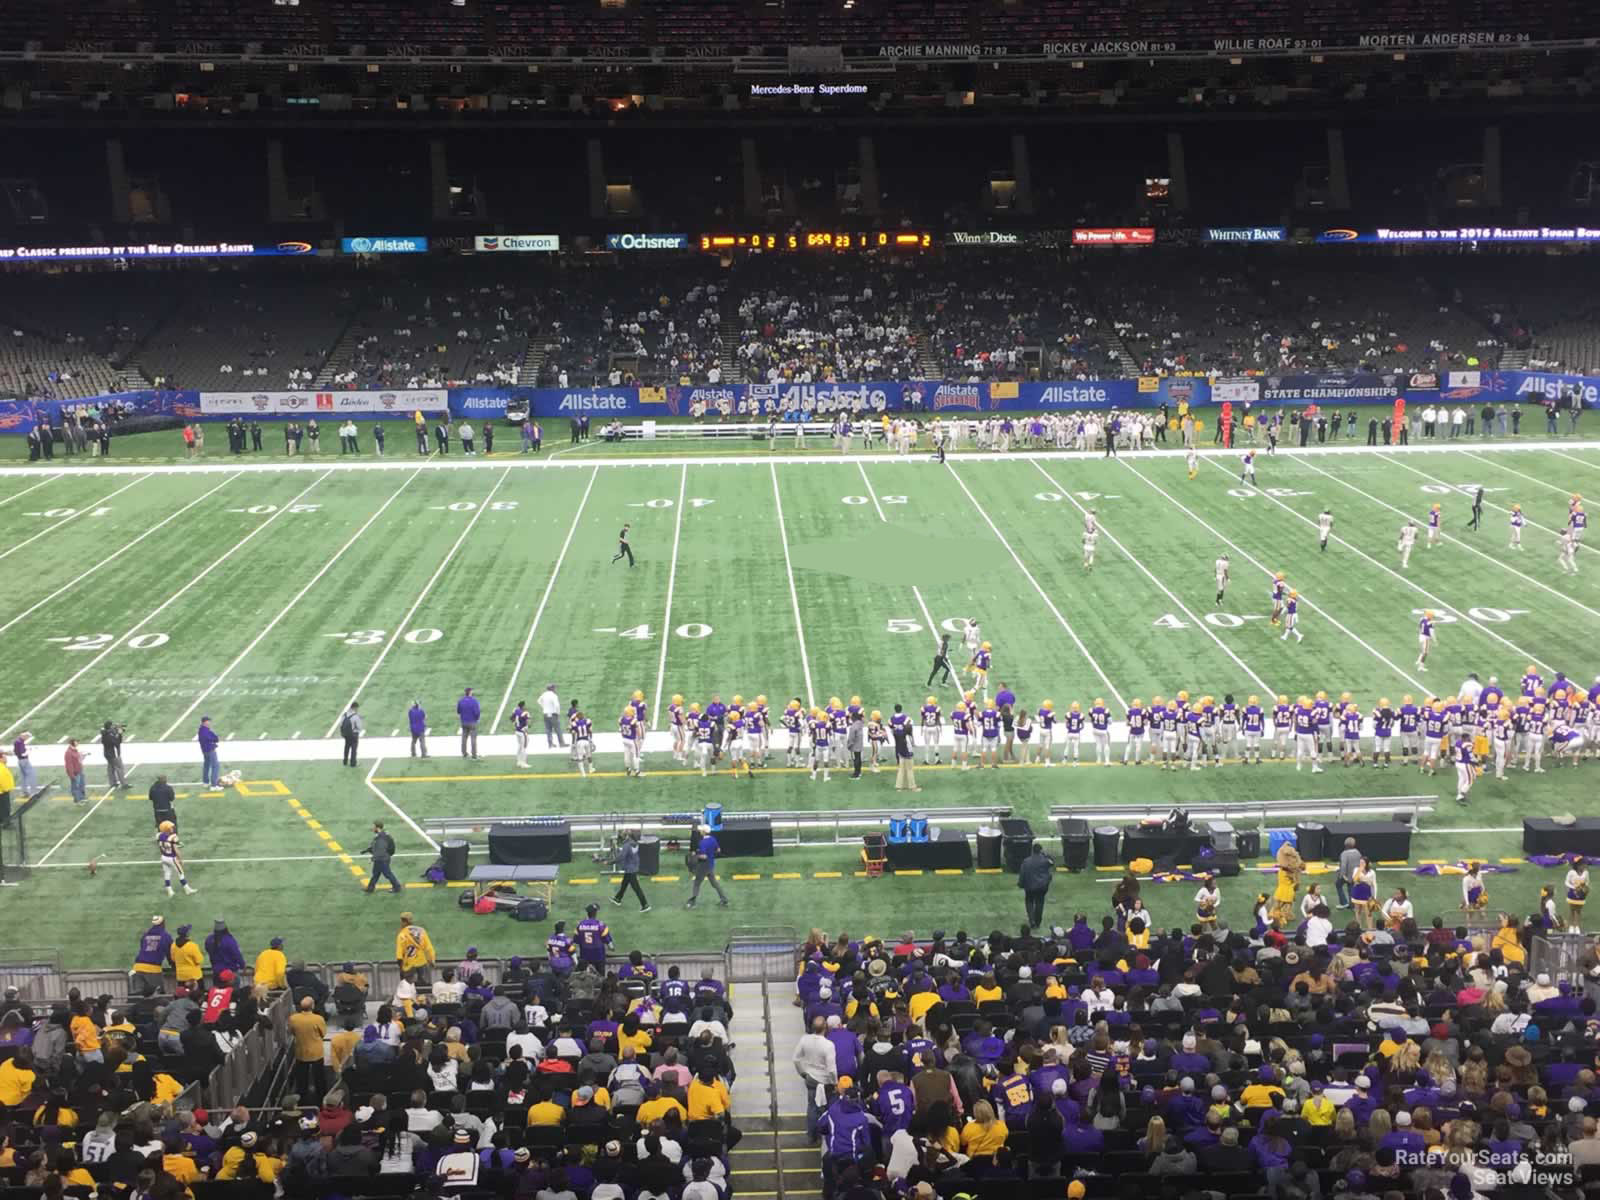 Superdome Seating Chart Virtual View